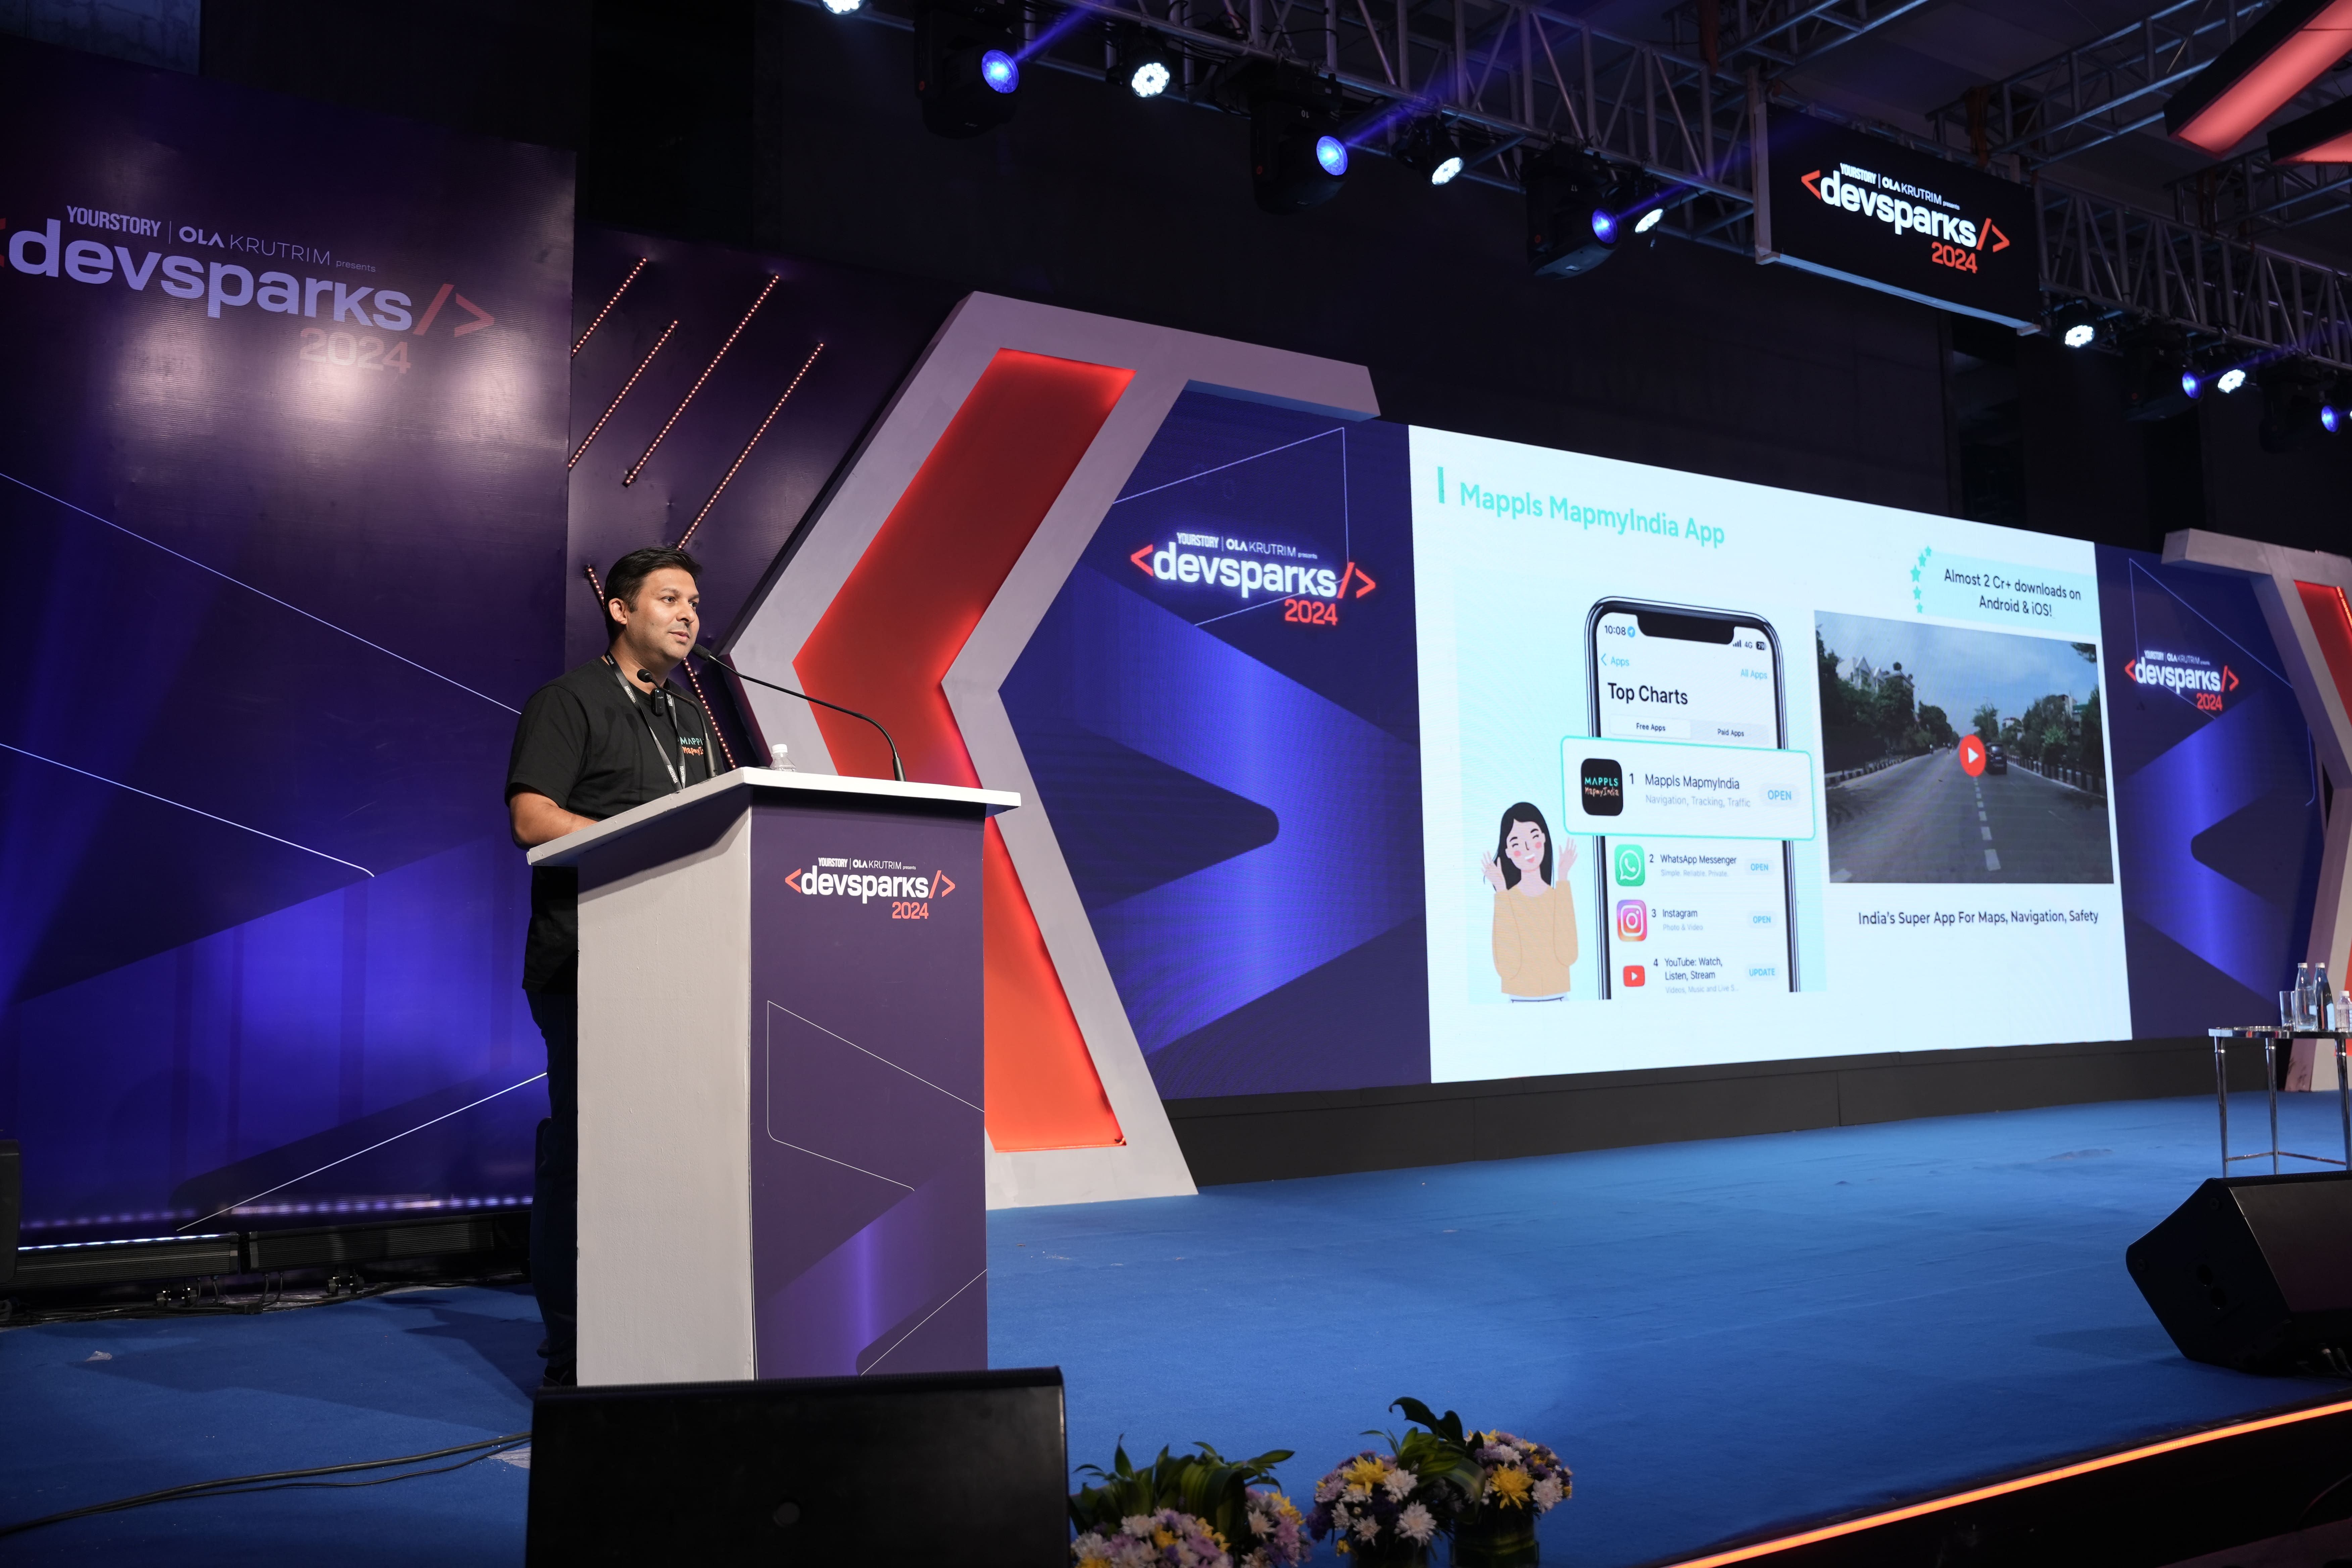 MapmyIndia CEO calls upon Indian developers to engage with its tech platforms

